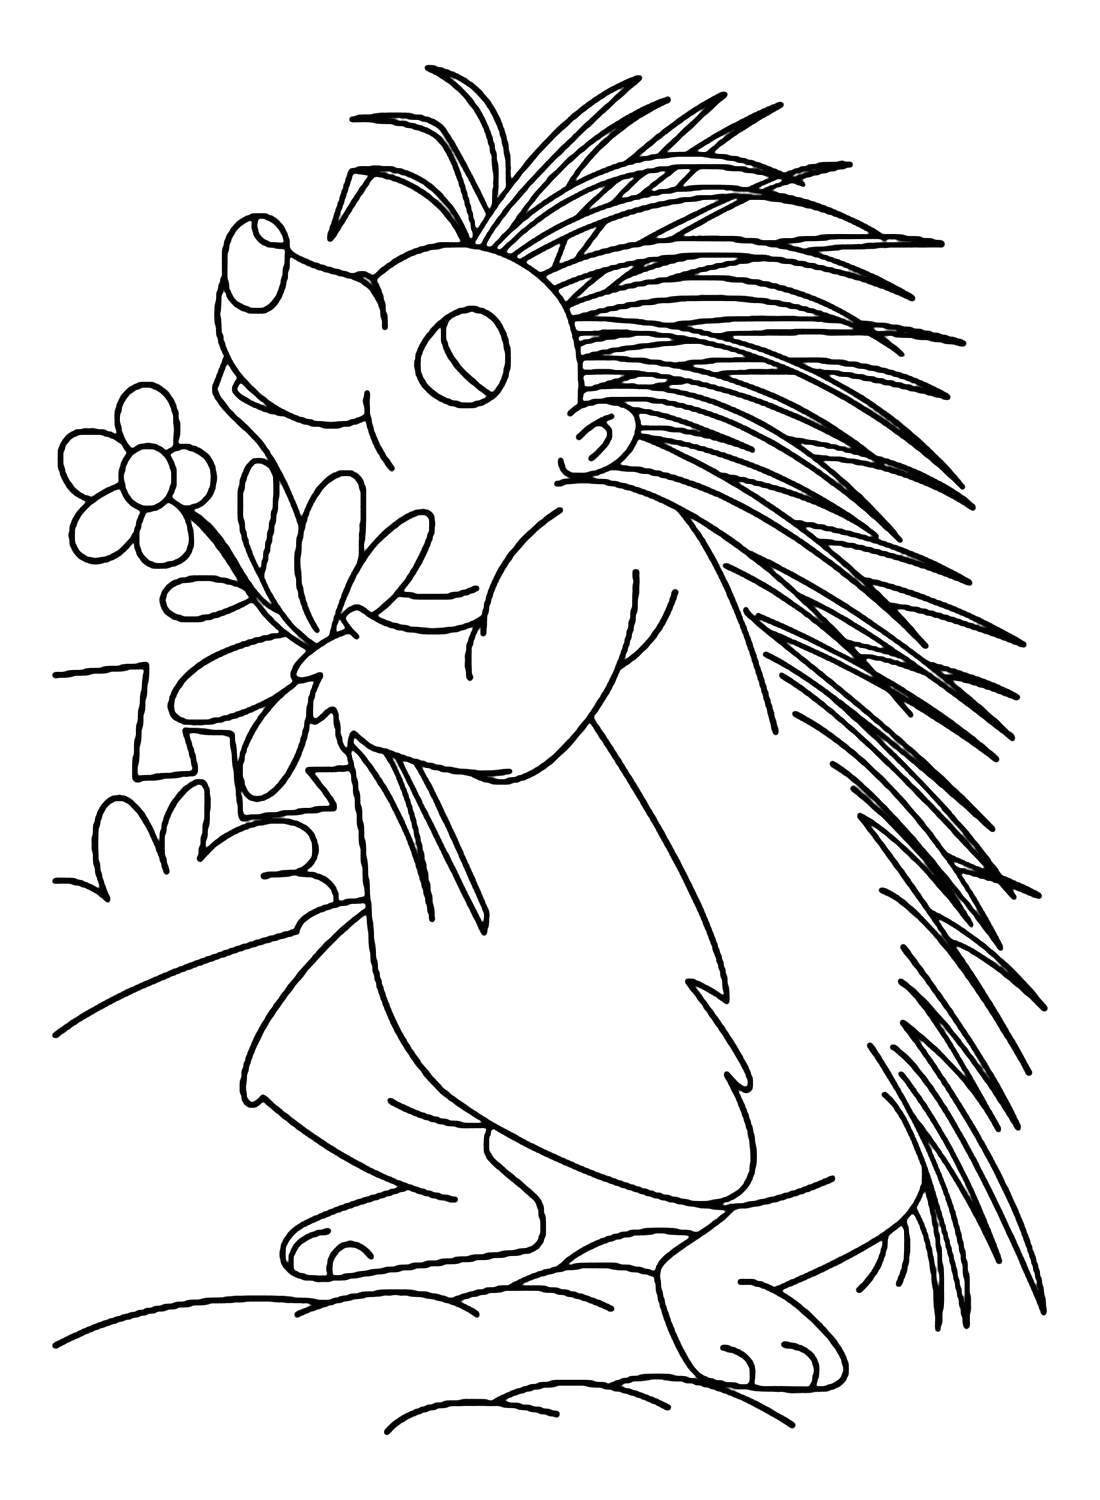 Porcupine Coloring Page To Download from Porcupine